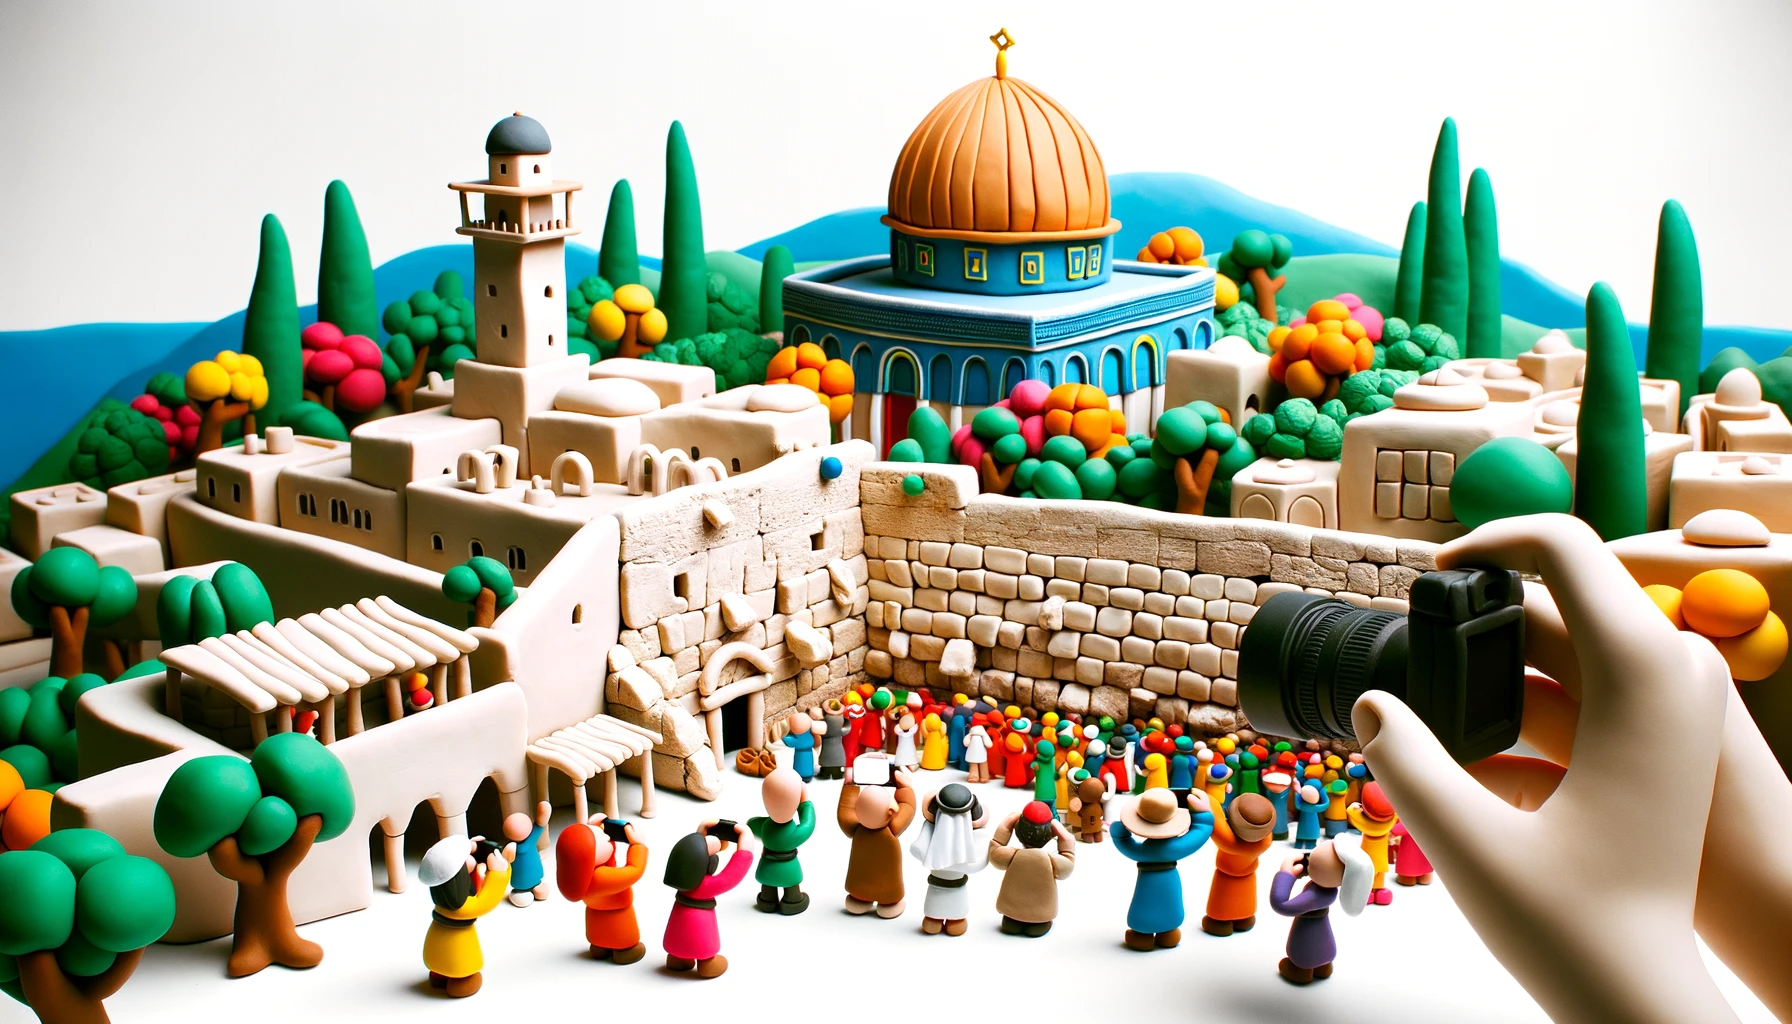 Vibrant scene of Israel's landmarks, including the Western Wall and the Dome of the Rock